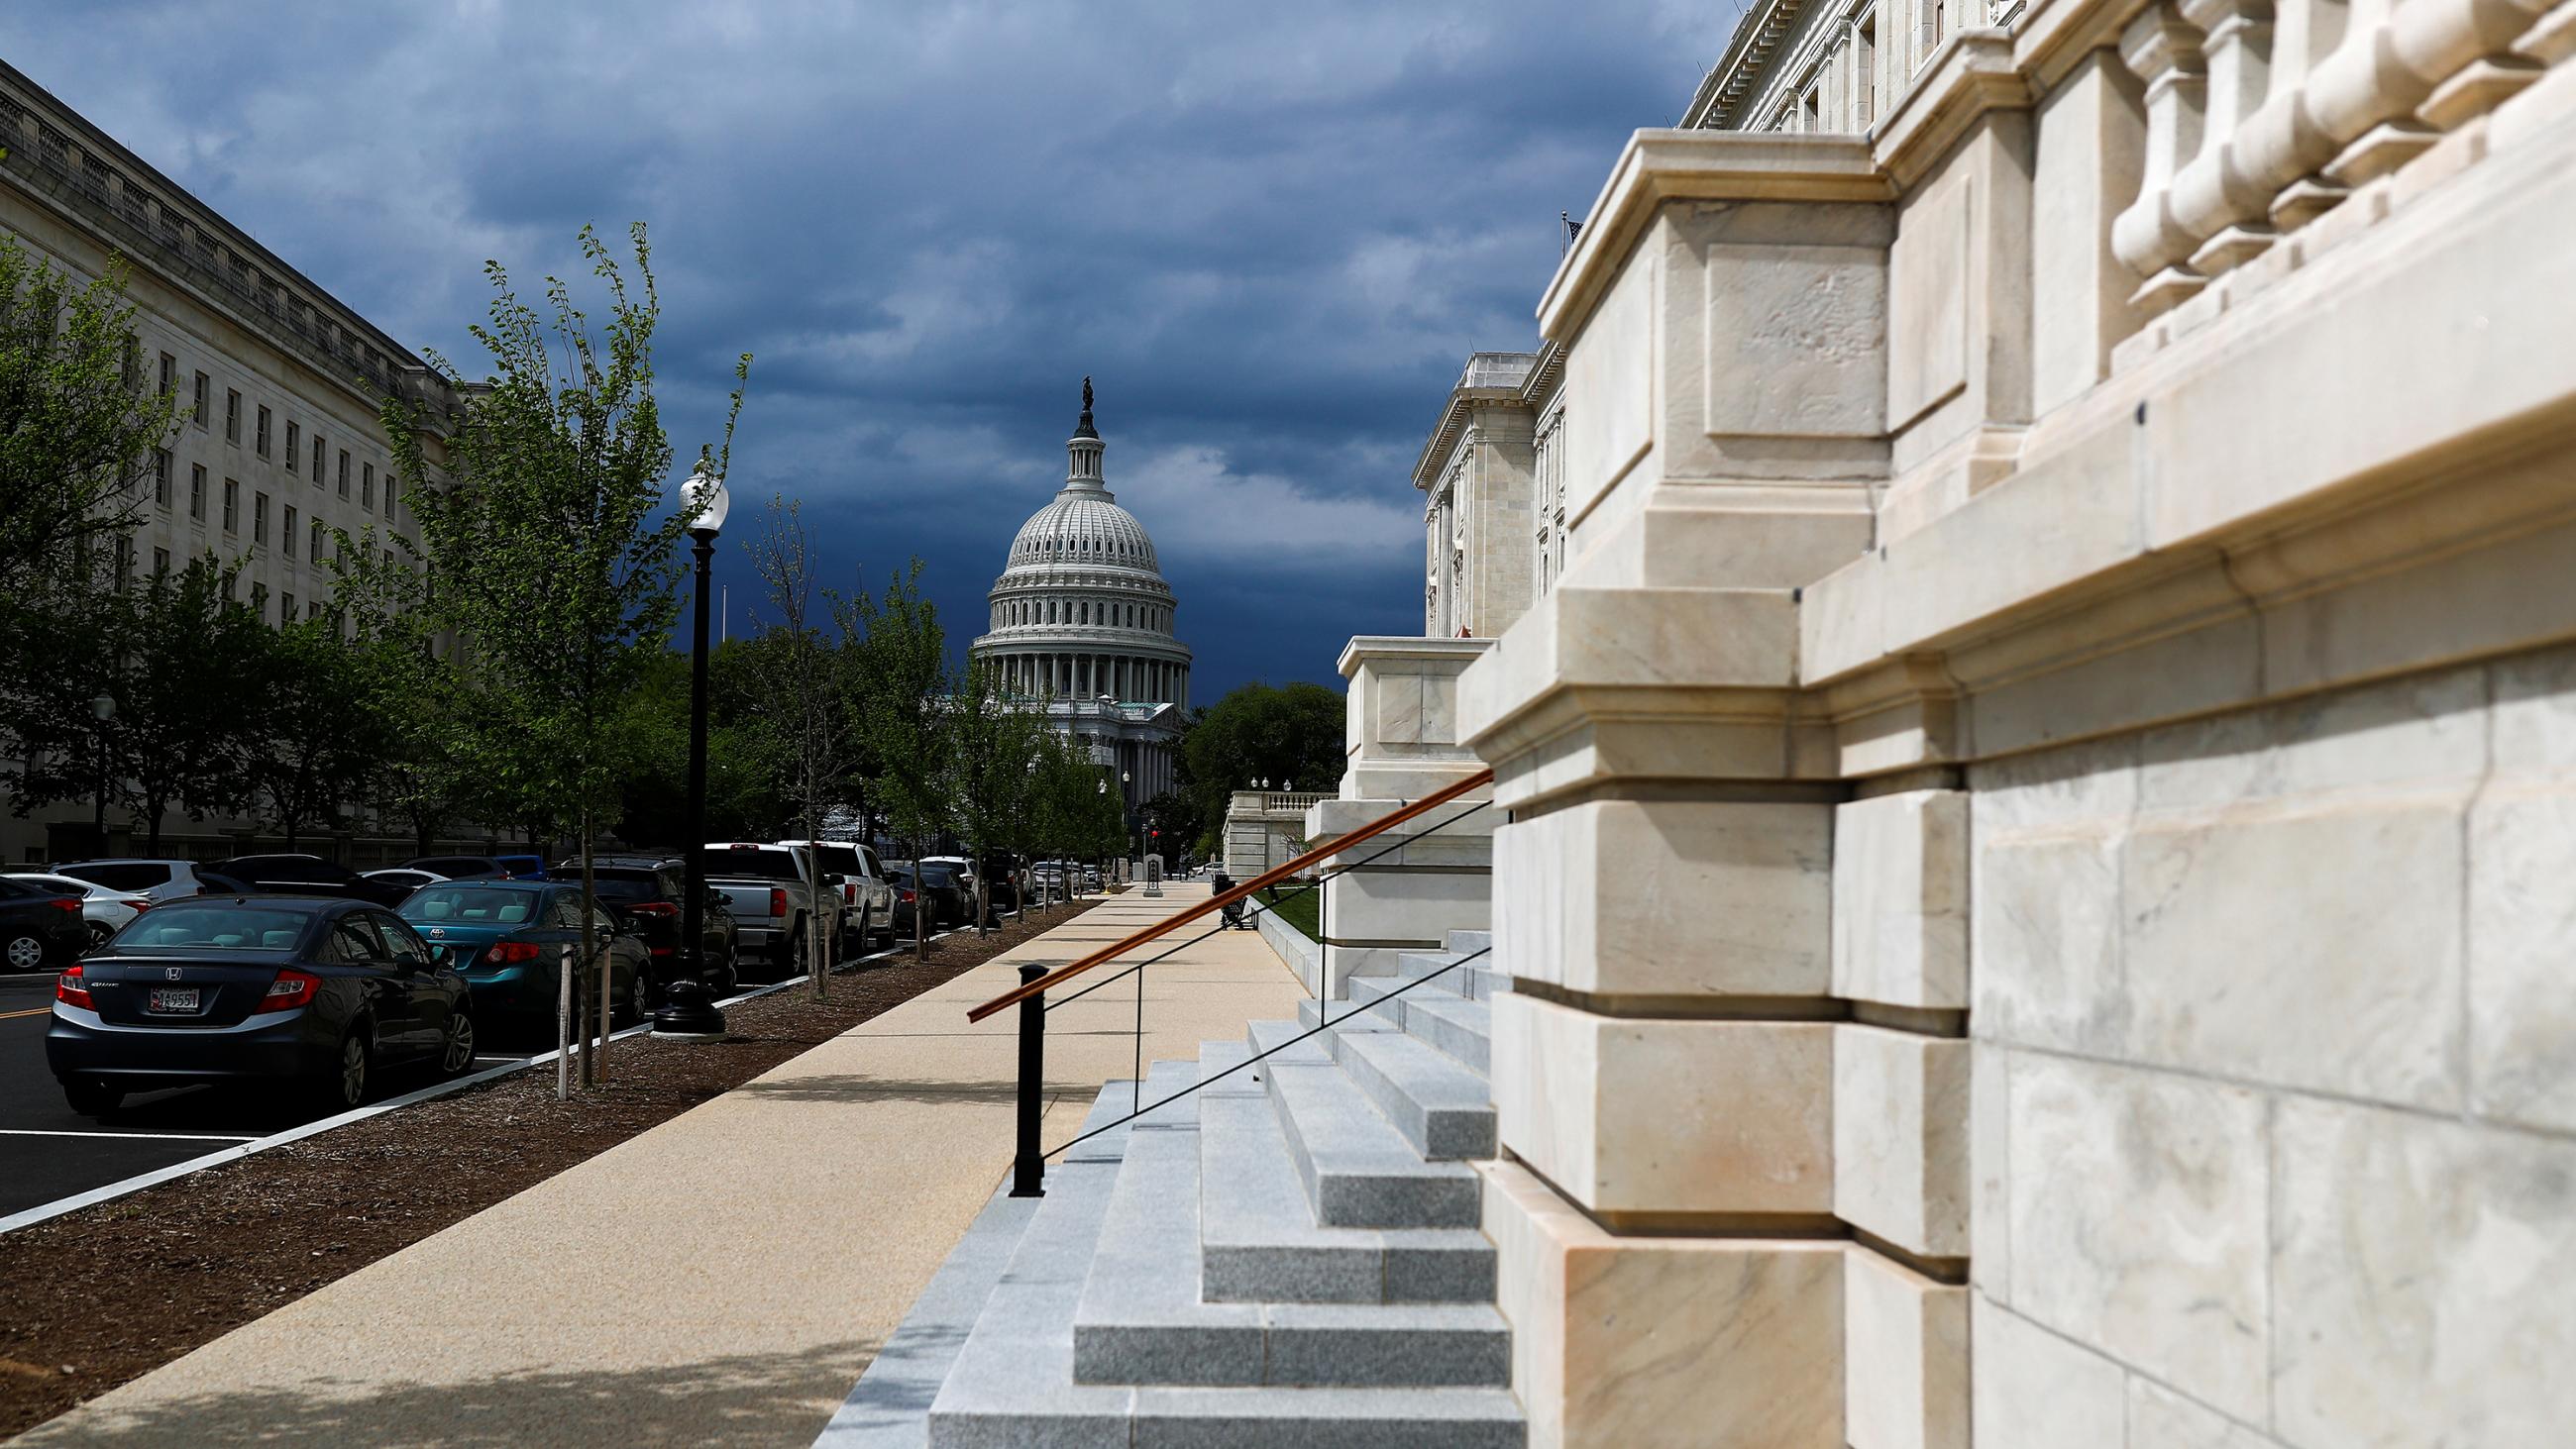 Picture shows the Capitol building from a distance with a set of stone steps in the foreground. 